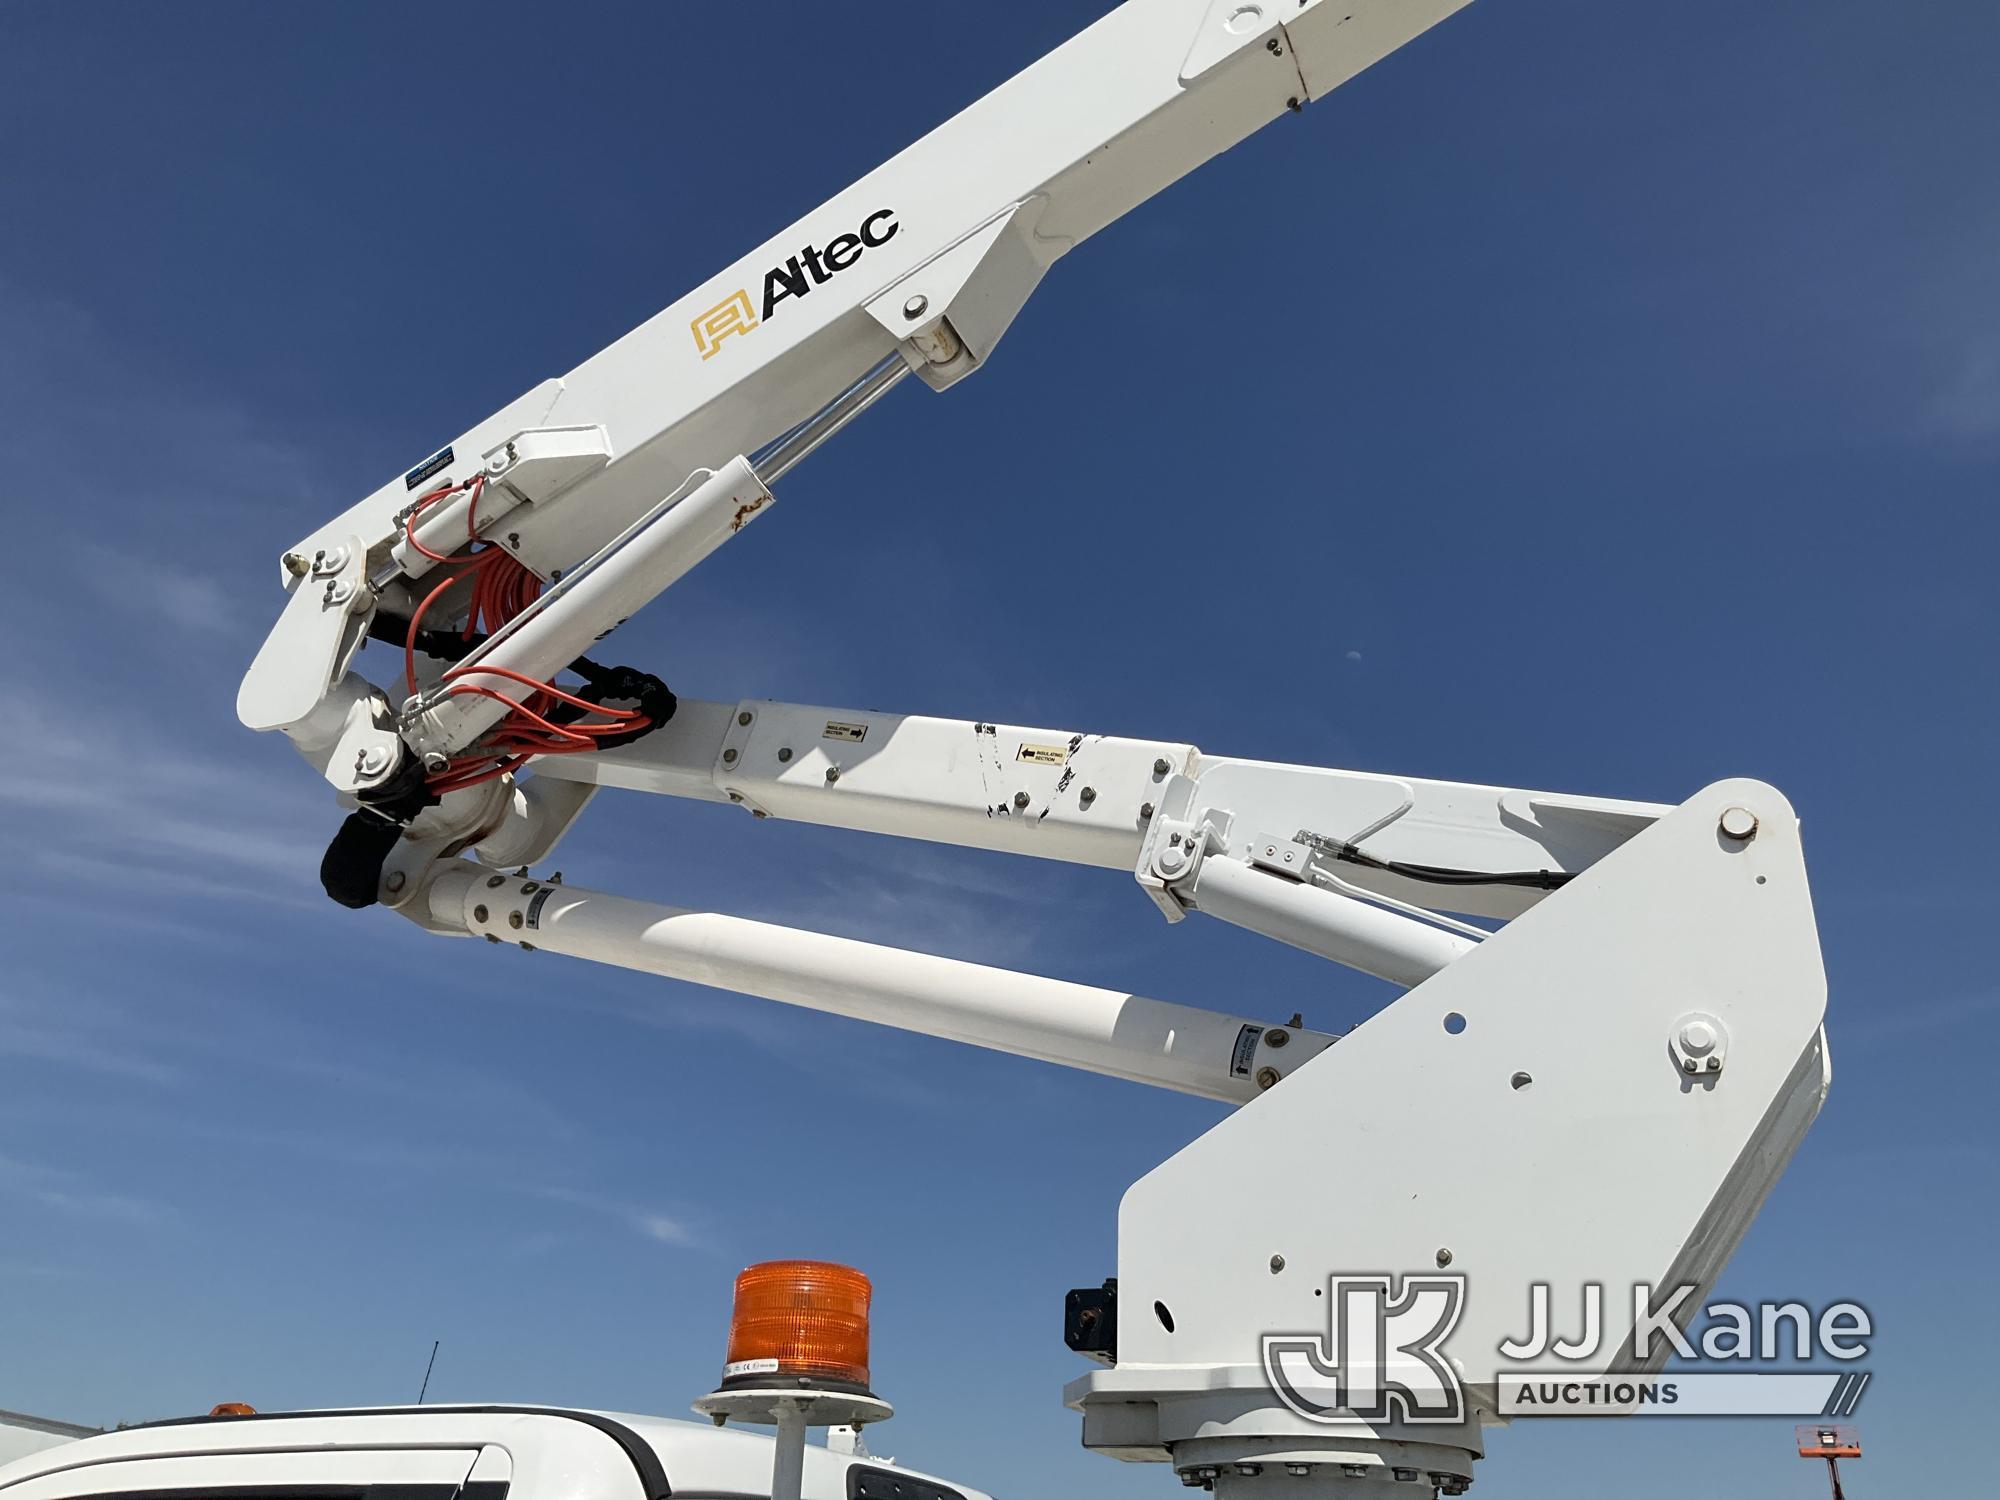 (Villa Rica, GA) Altec AT37G, Articulating & Telescopic Bucket Truck mounted behind cab on 2017 FORD